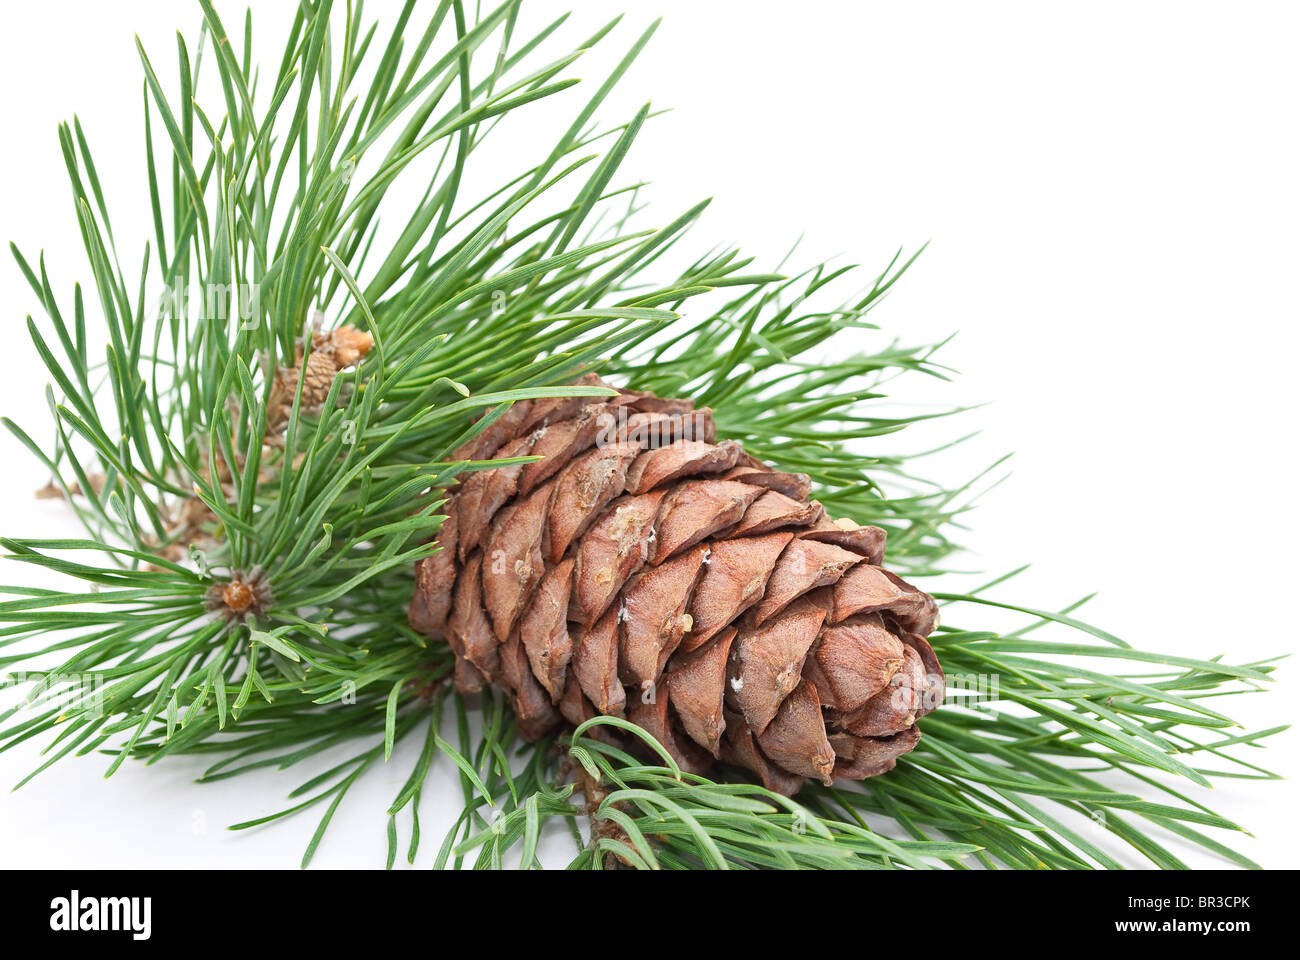 Siberian pine cone with branch Stock Photo